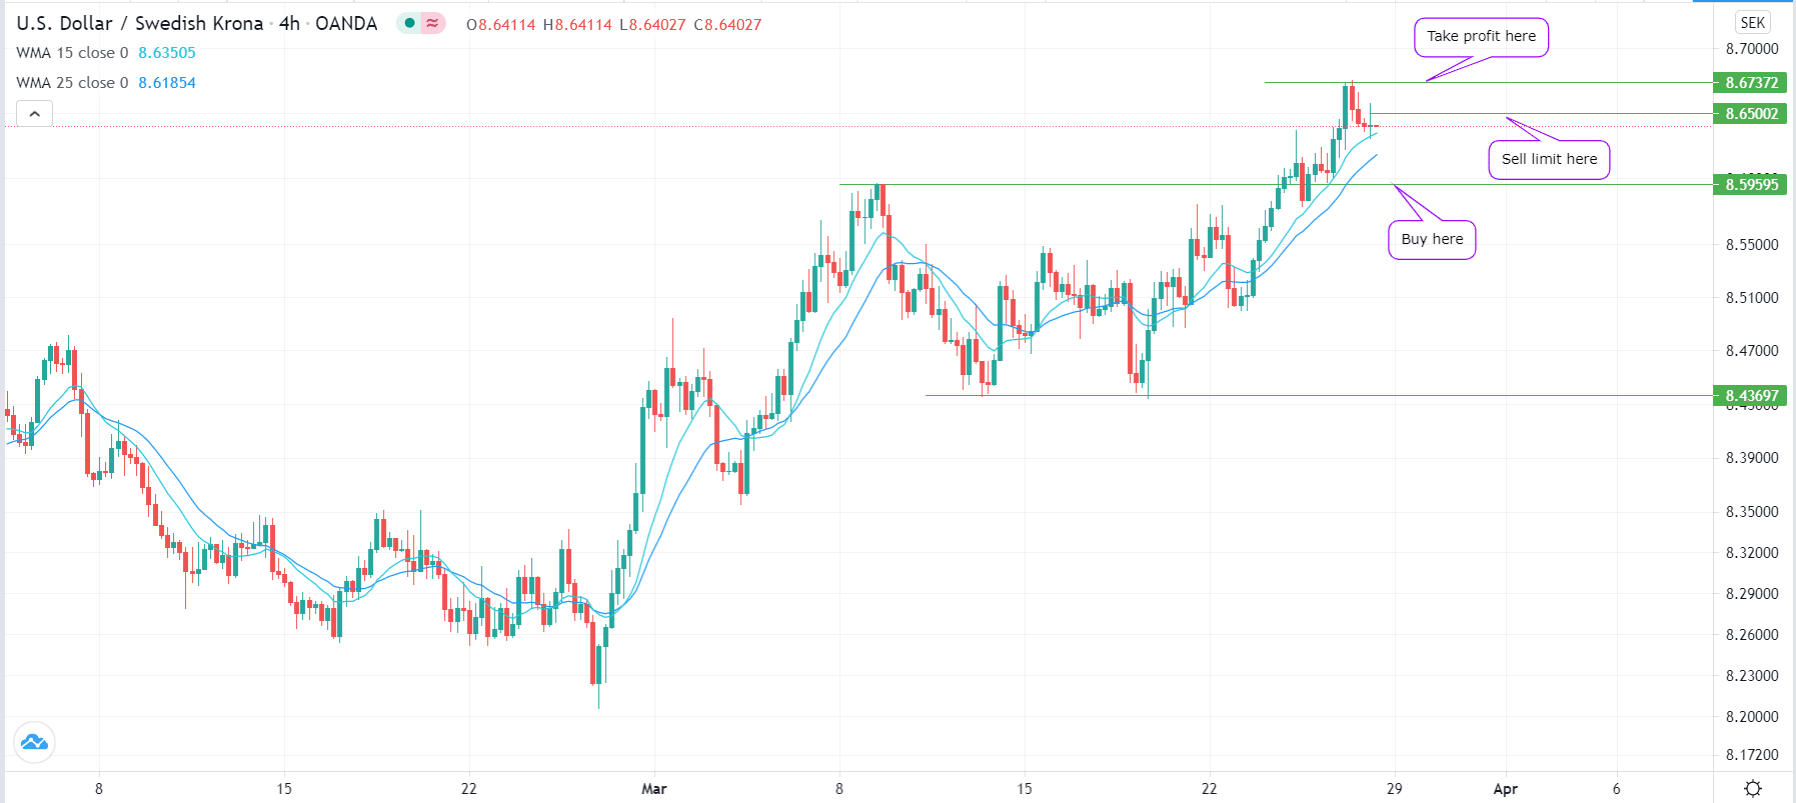 For example, in the USD/SEK pair you could initiate a buy trade at 8.5959 and a take profit at 8.6732. At the same time, you could add a sell limit at 8.6540.